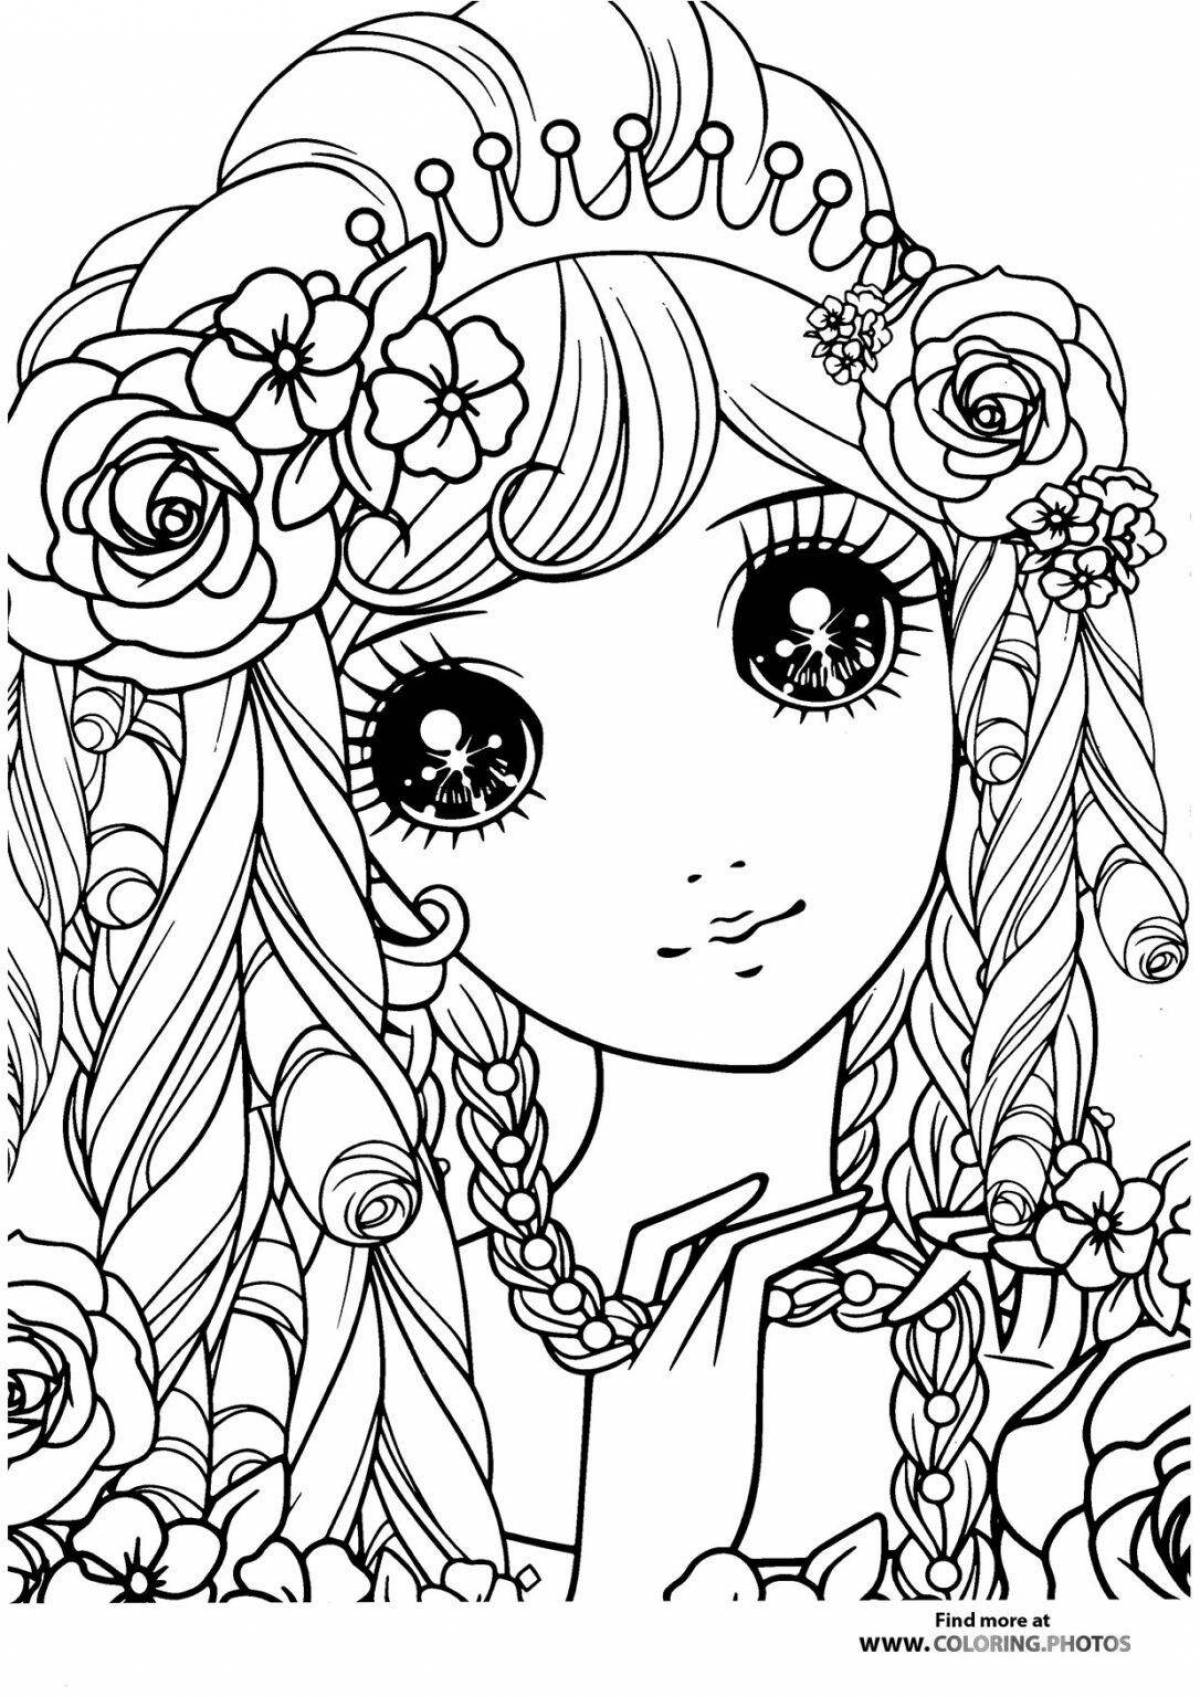 Colorful coloring book for girls is the best in the world